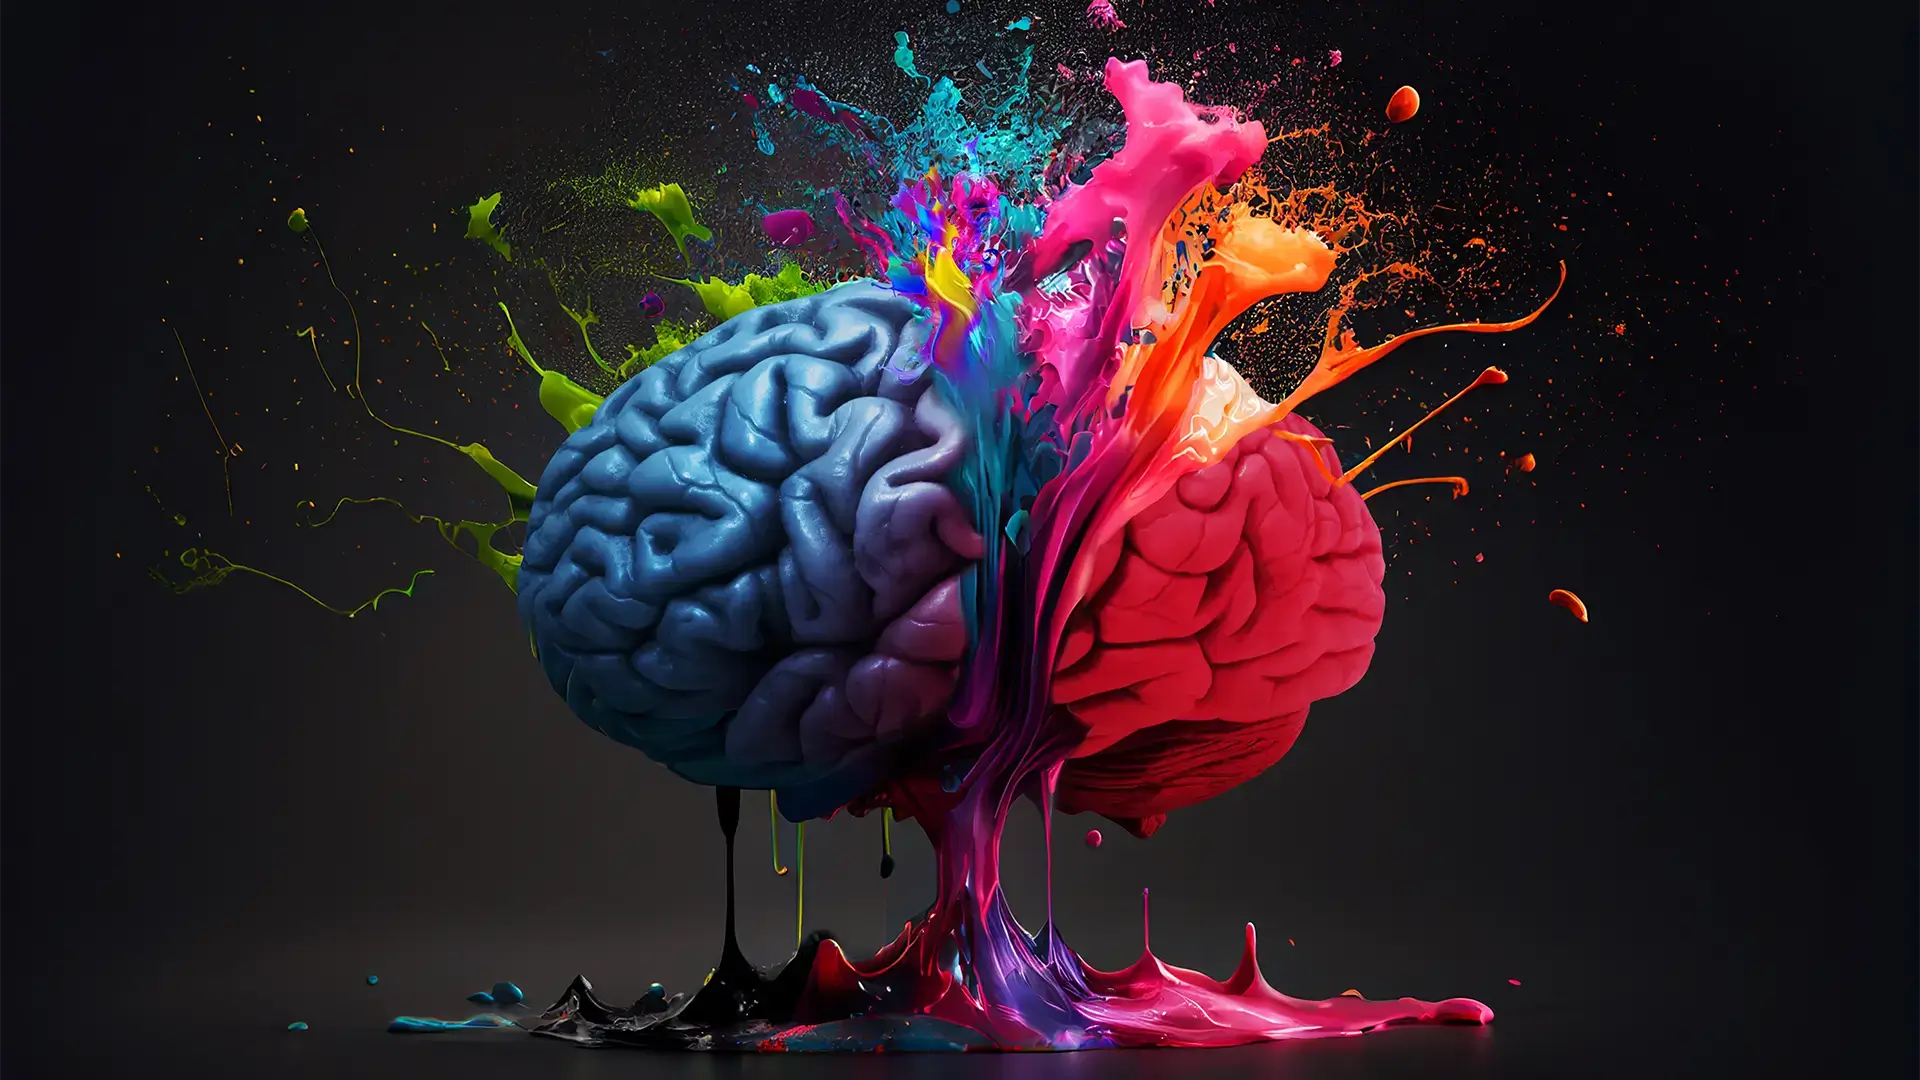 Two halves of a brain, one blue and one pink, with an explosion of paint coming out from the top